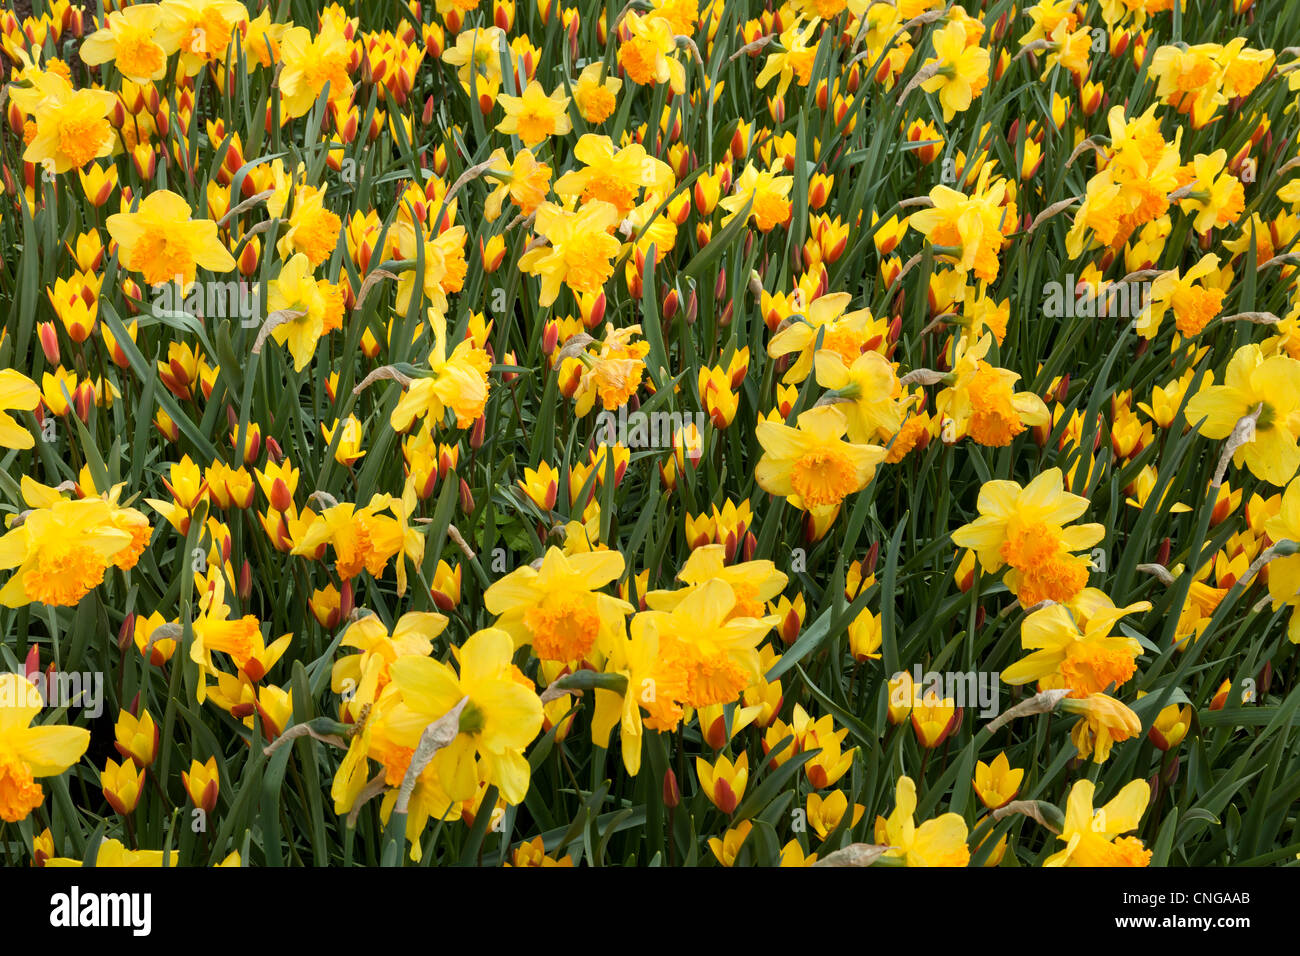 Yellow flowerbed with daffodils 'Suada' and tulips 'Tubergen's Gem' (Tulipa chrysantha 'Tubergen's Gem'). Stock Photo